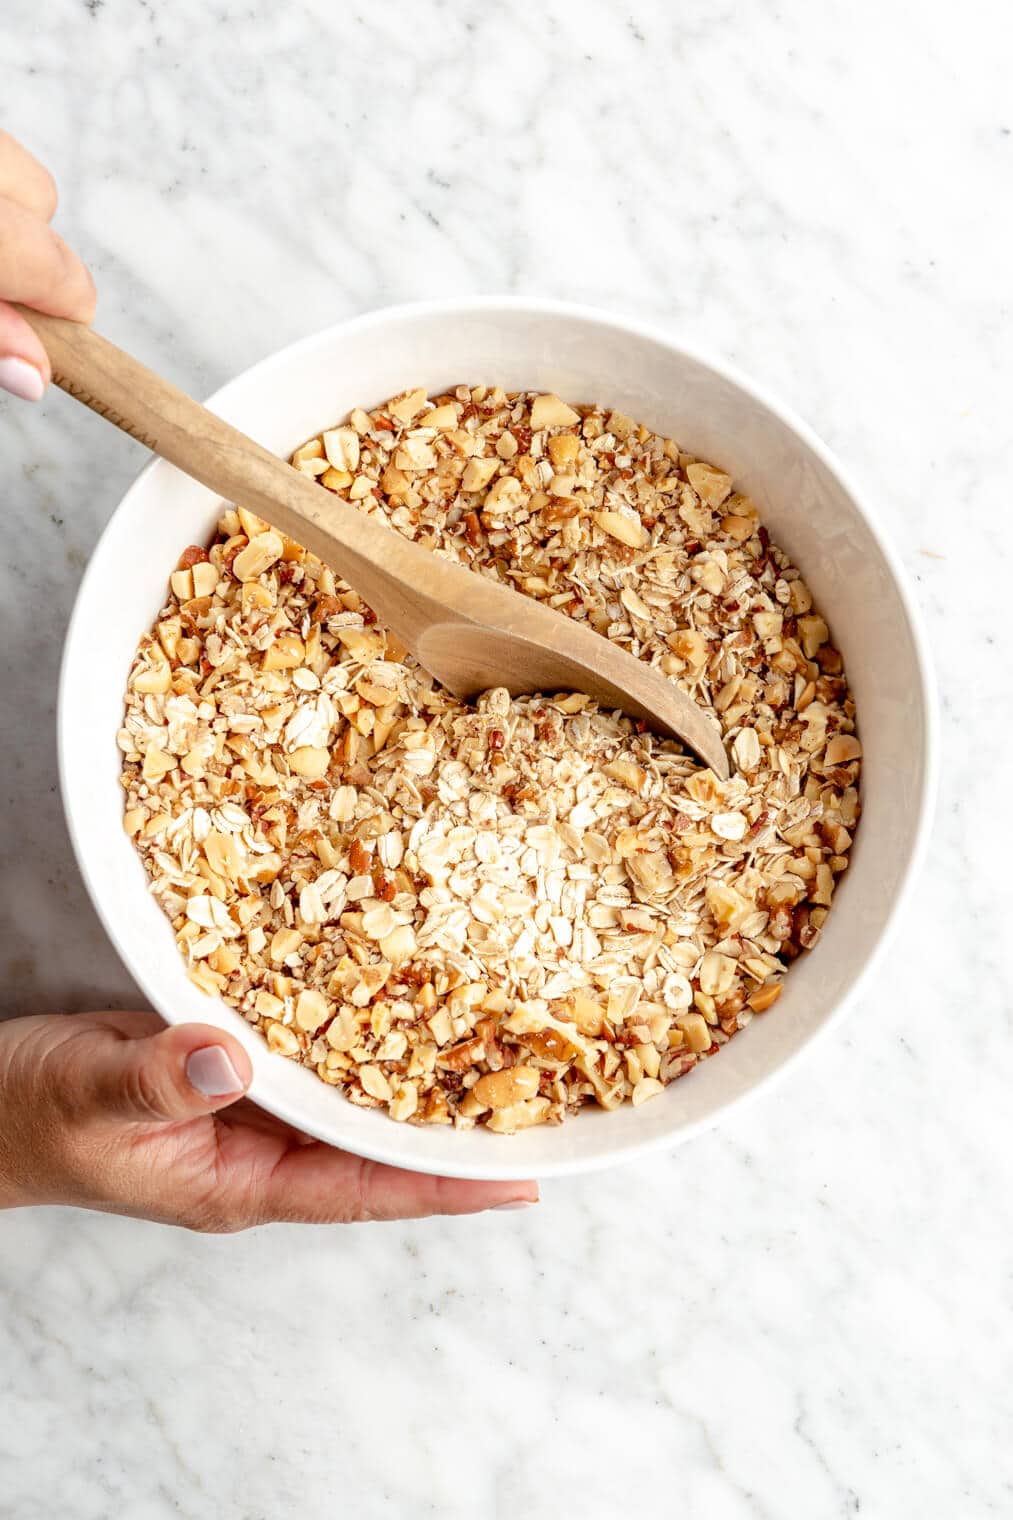 Hand holding the side of a white bowl and the other hand is holding a wooden spoon and stirring dry oats and nuts together.